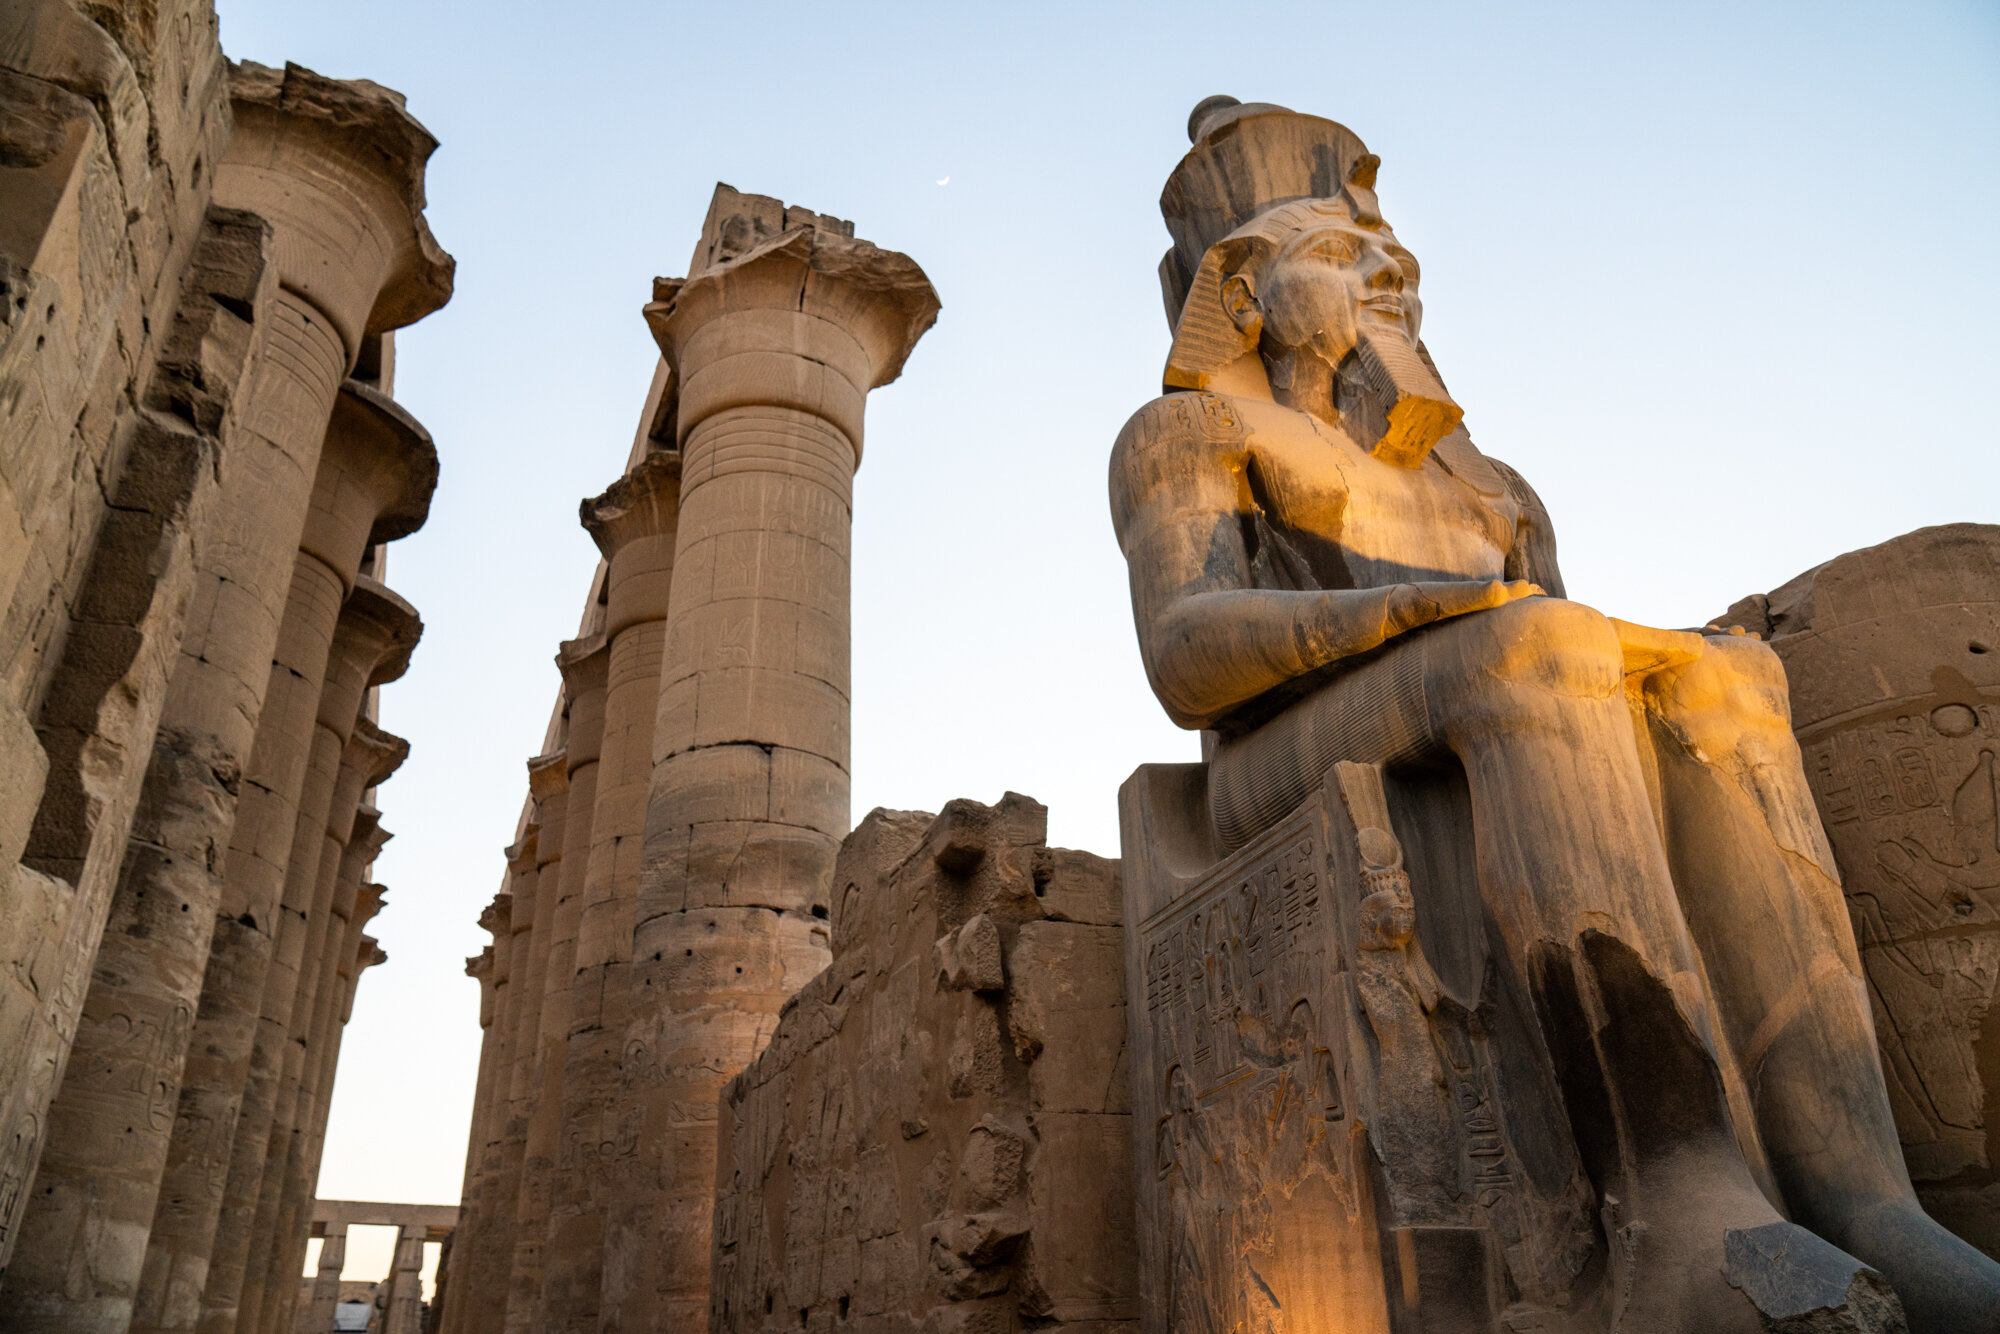 Eric Kruszewski photographs The Luxor Temple in Egypt for Lindblad Expeditions.